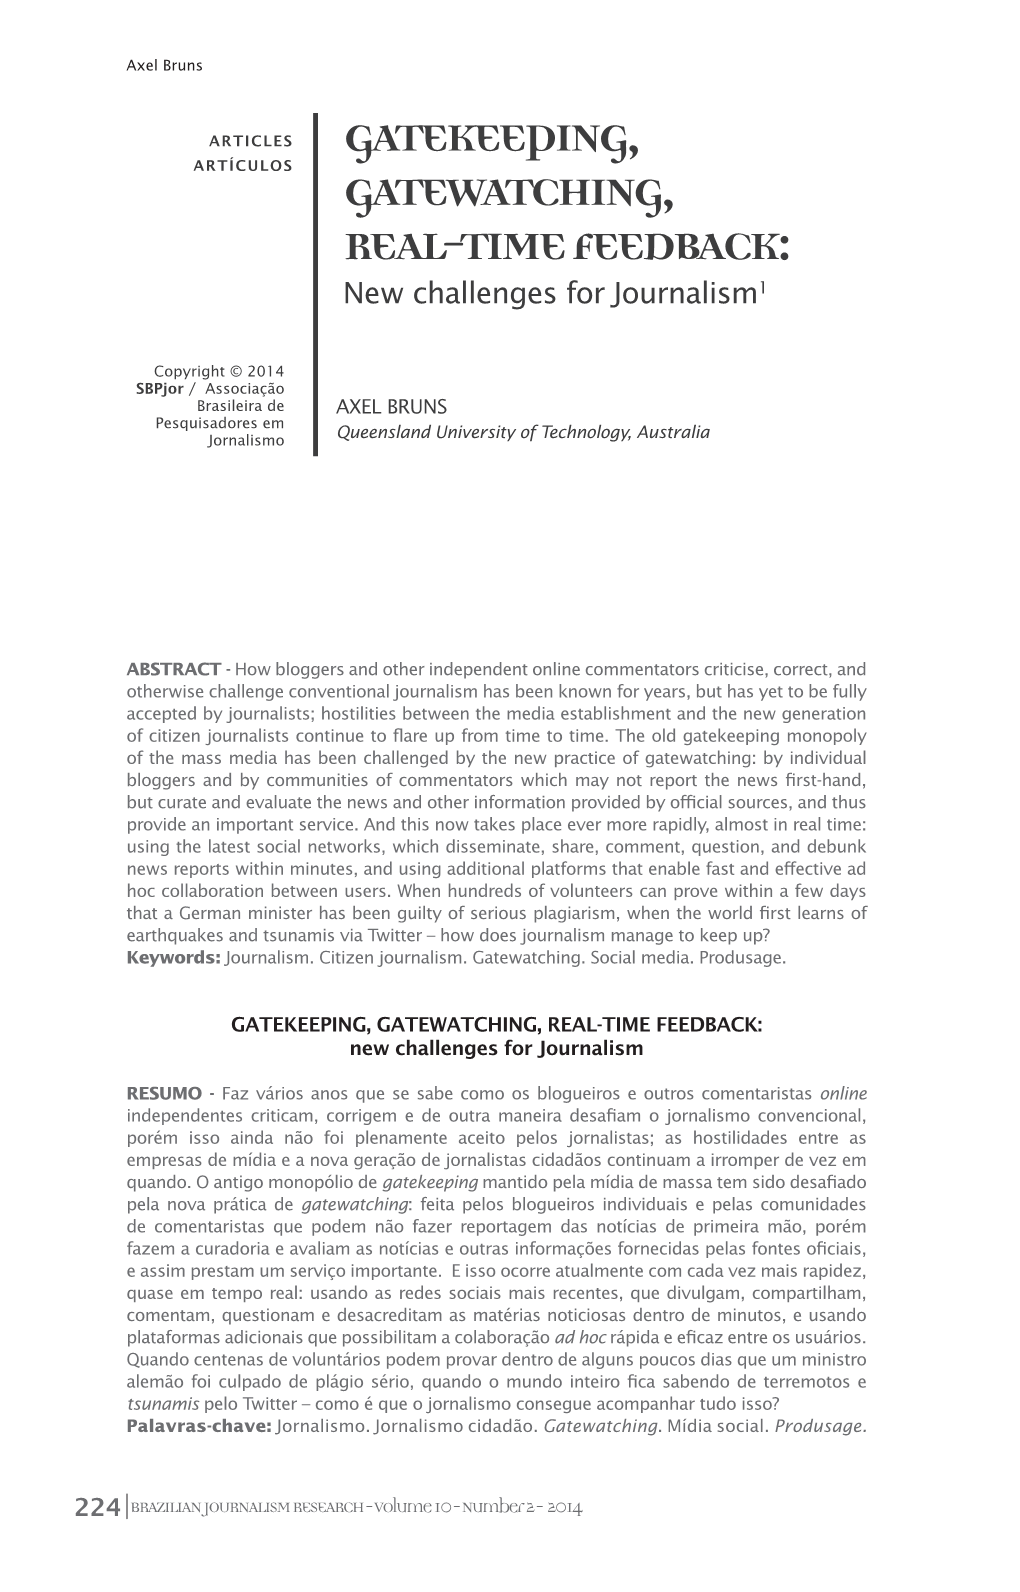 GATEKEEPING, GATEWATCHING, REAL-TIME FEEDBACK: New Challenges for Journalism